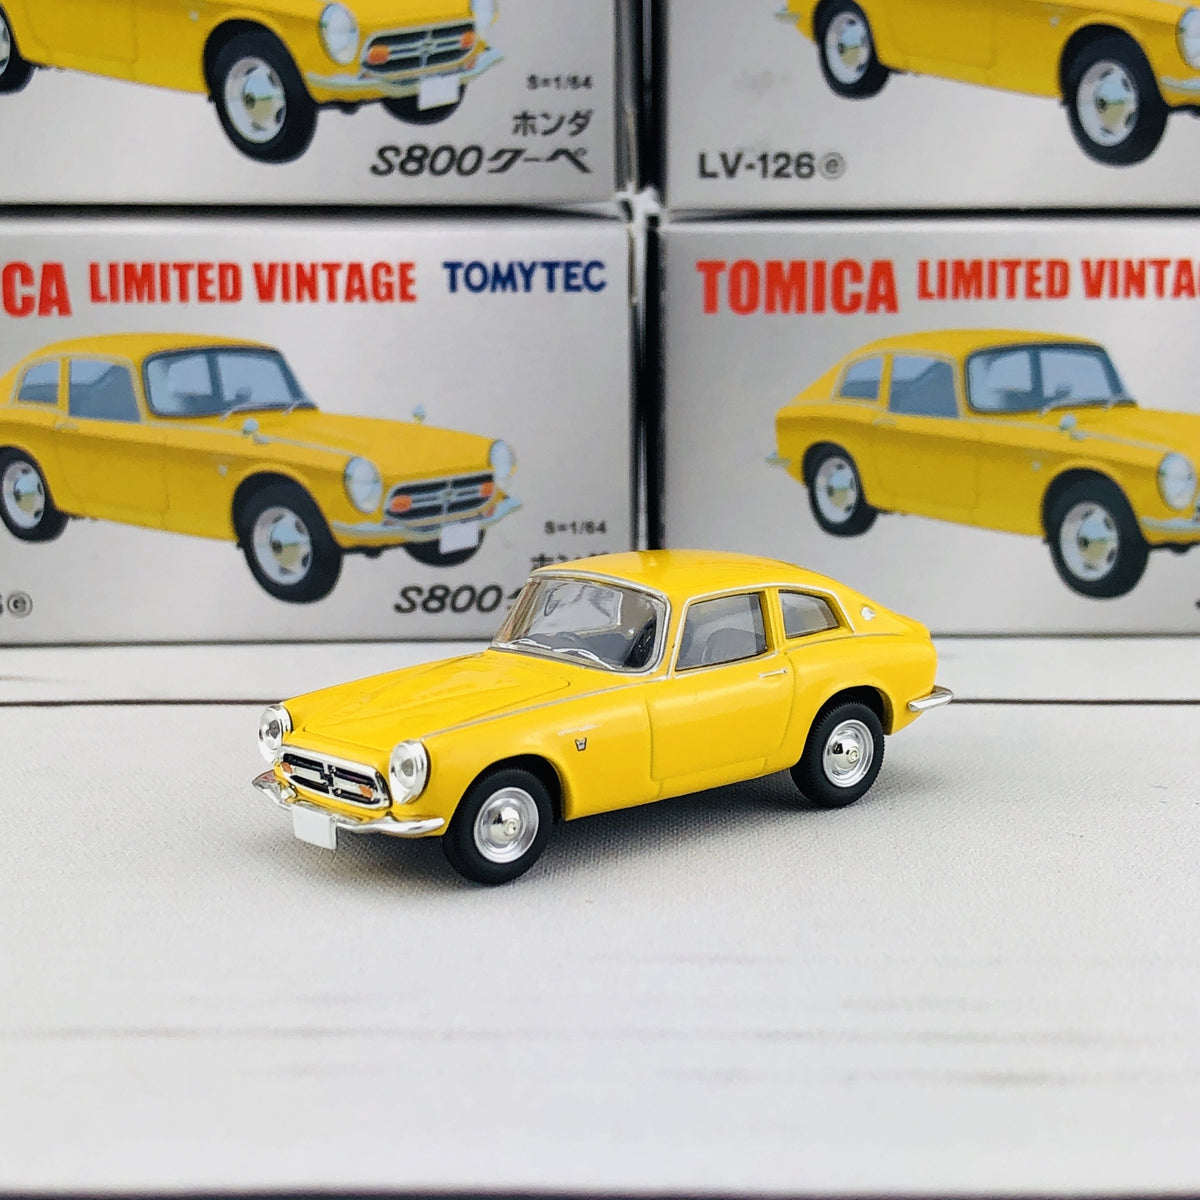 TOMICA LIMITED VINTAGE LV-126e 1//64 Yellow HONDA S800 COUPE